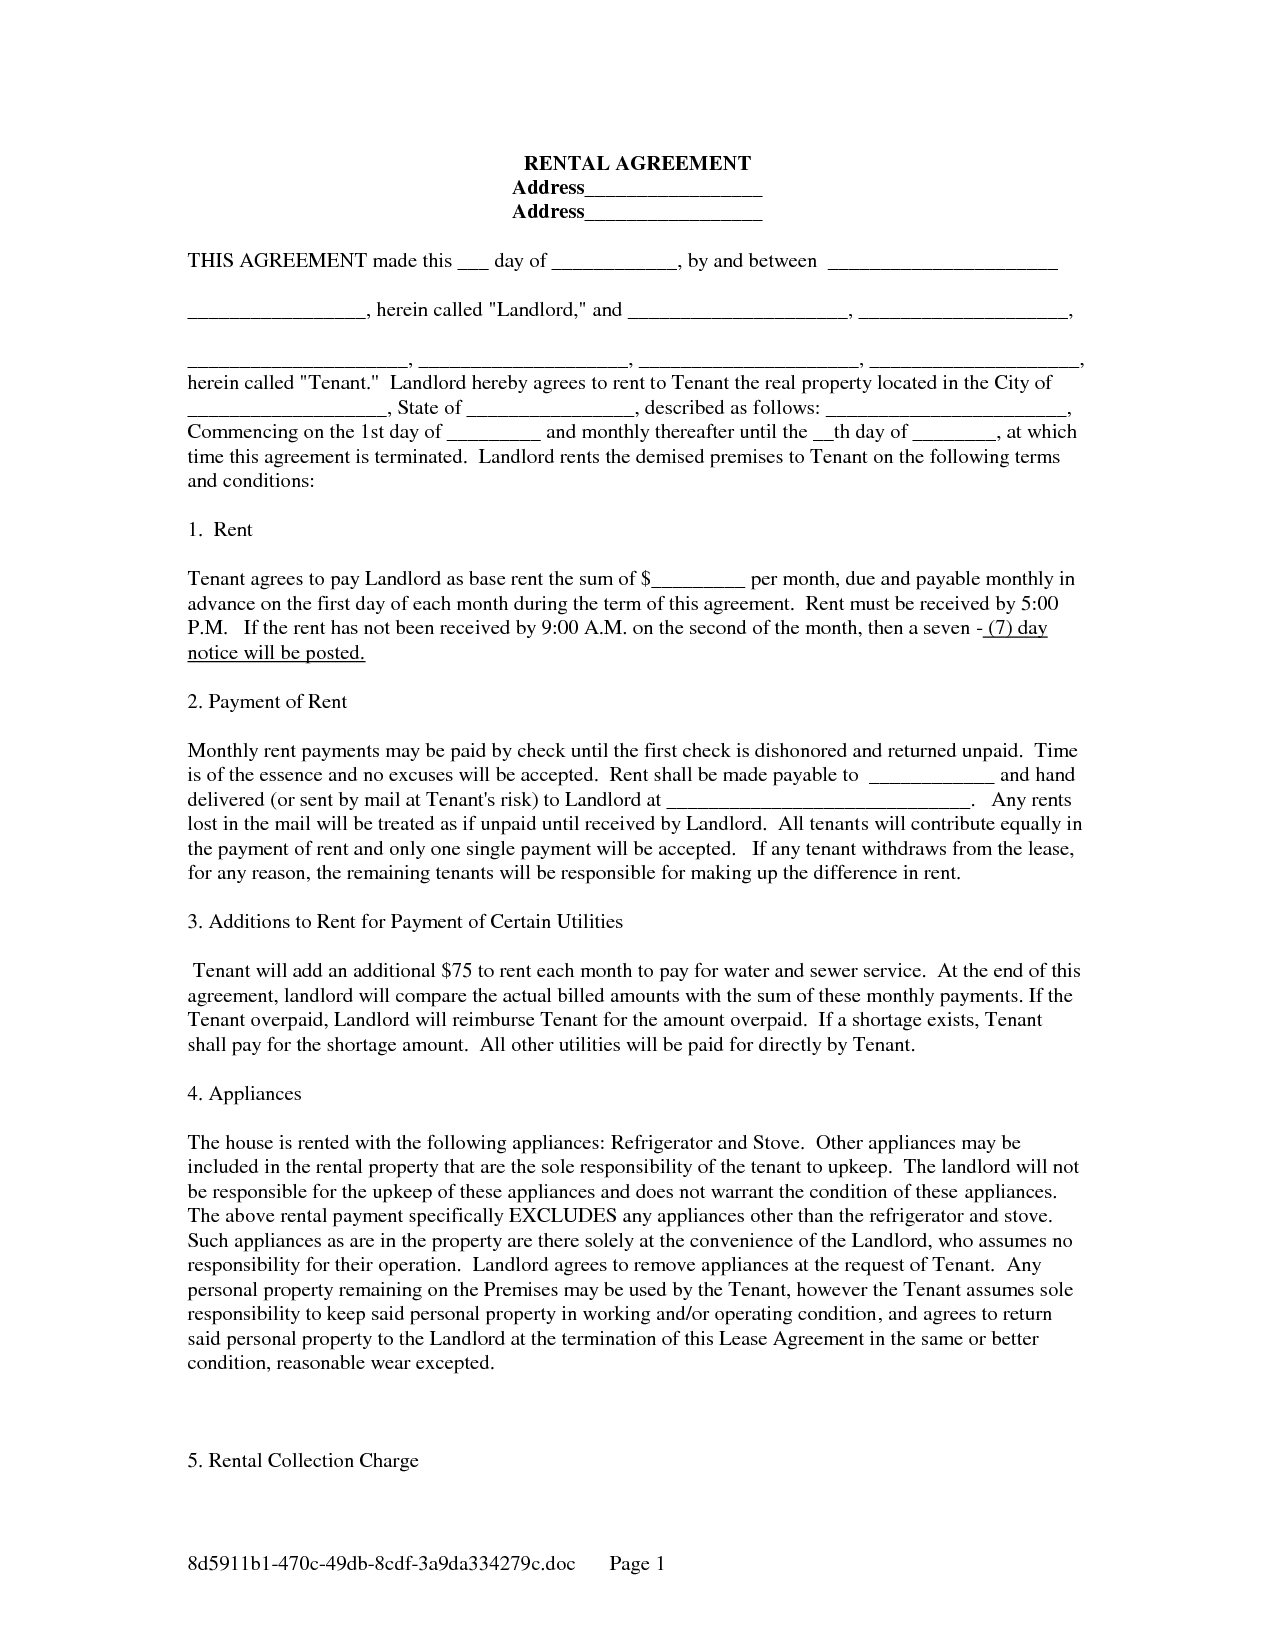 Printable Rental Lease Agreement Form For Free | Shop Fresh - Free Printable Lease Agreement Forms